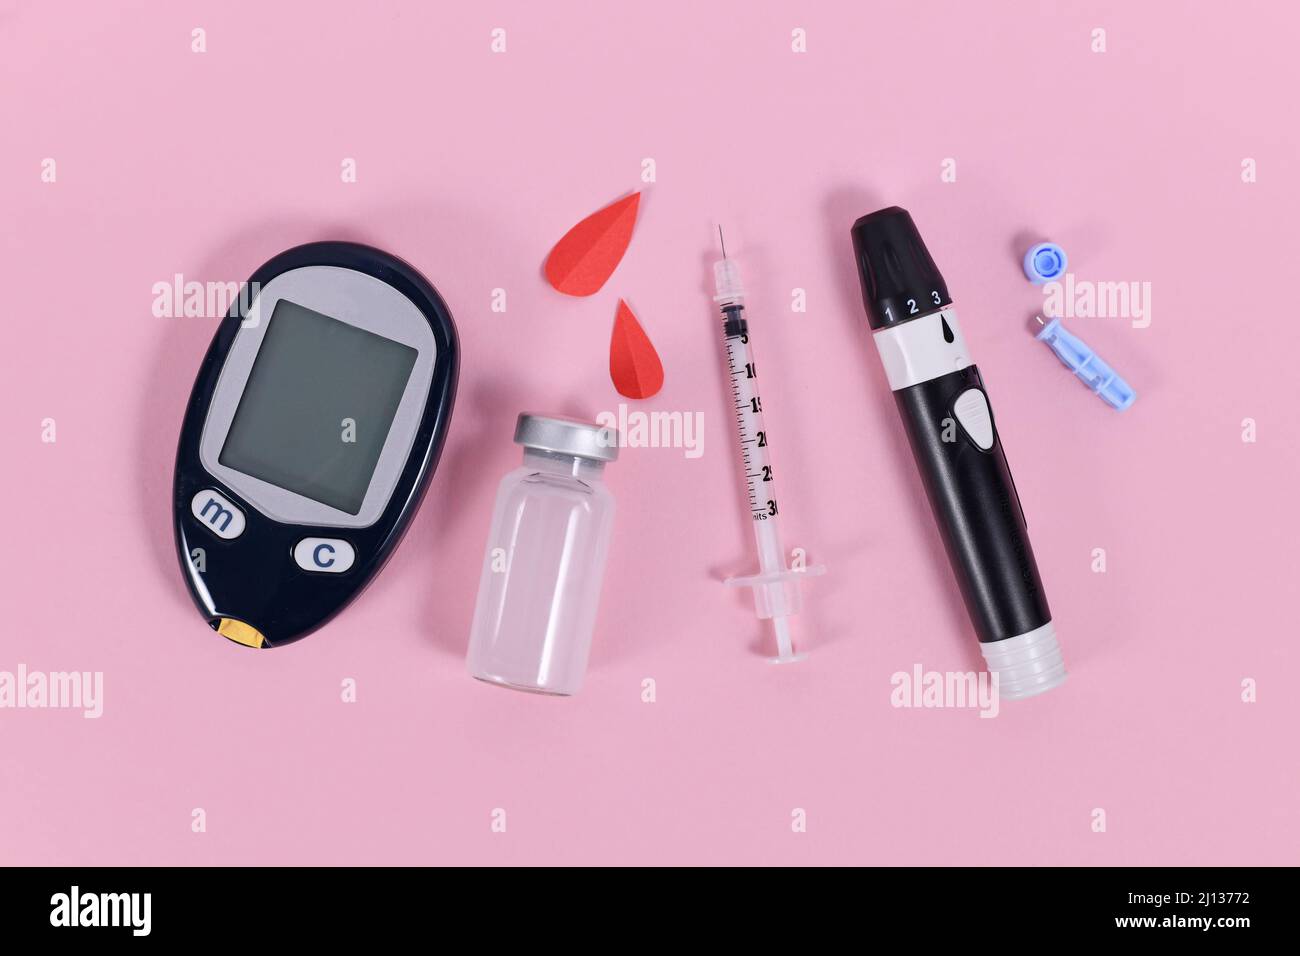 Diabetes treatment equipment with blood glucose sugar meter, lancet, insulin vial and syringe on pink background Stock Photo